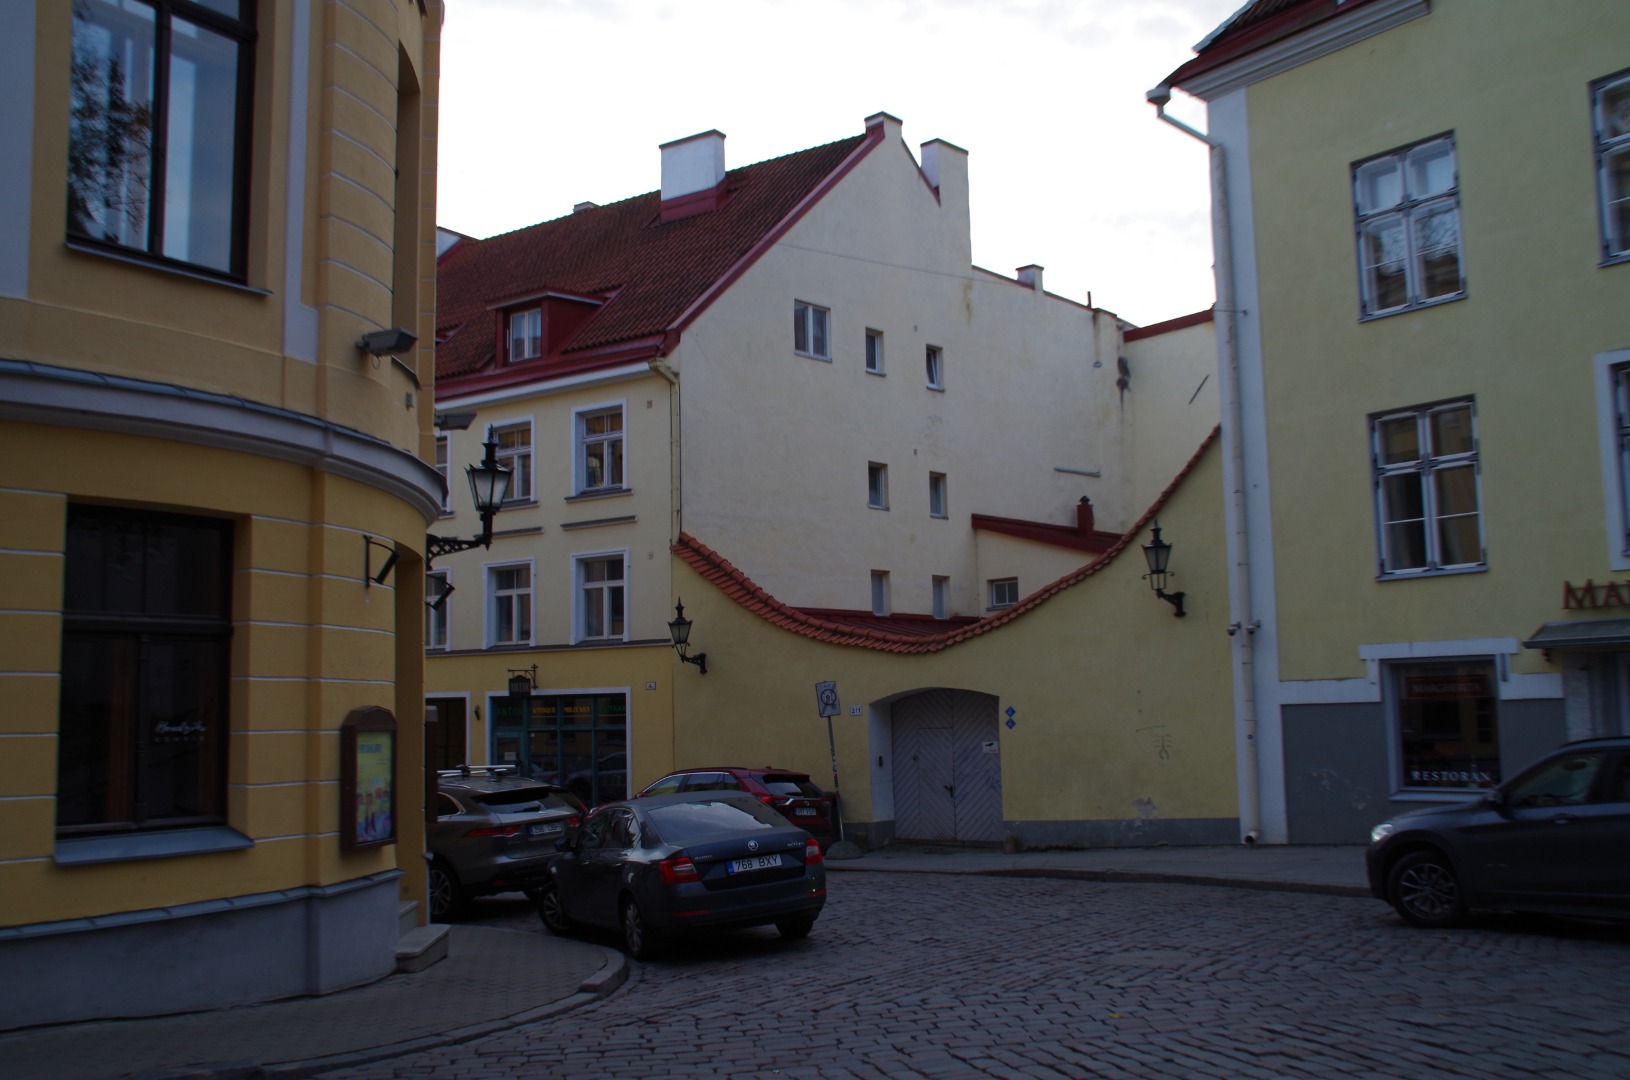 View from Nunne Street to Laiale Street in Tallinn Old Town rephoto